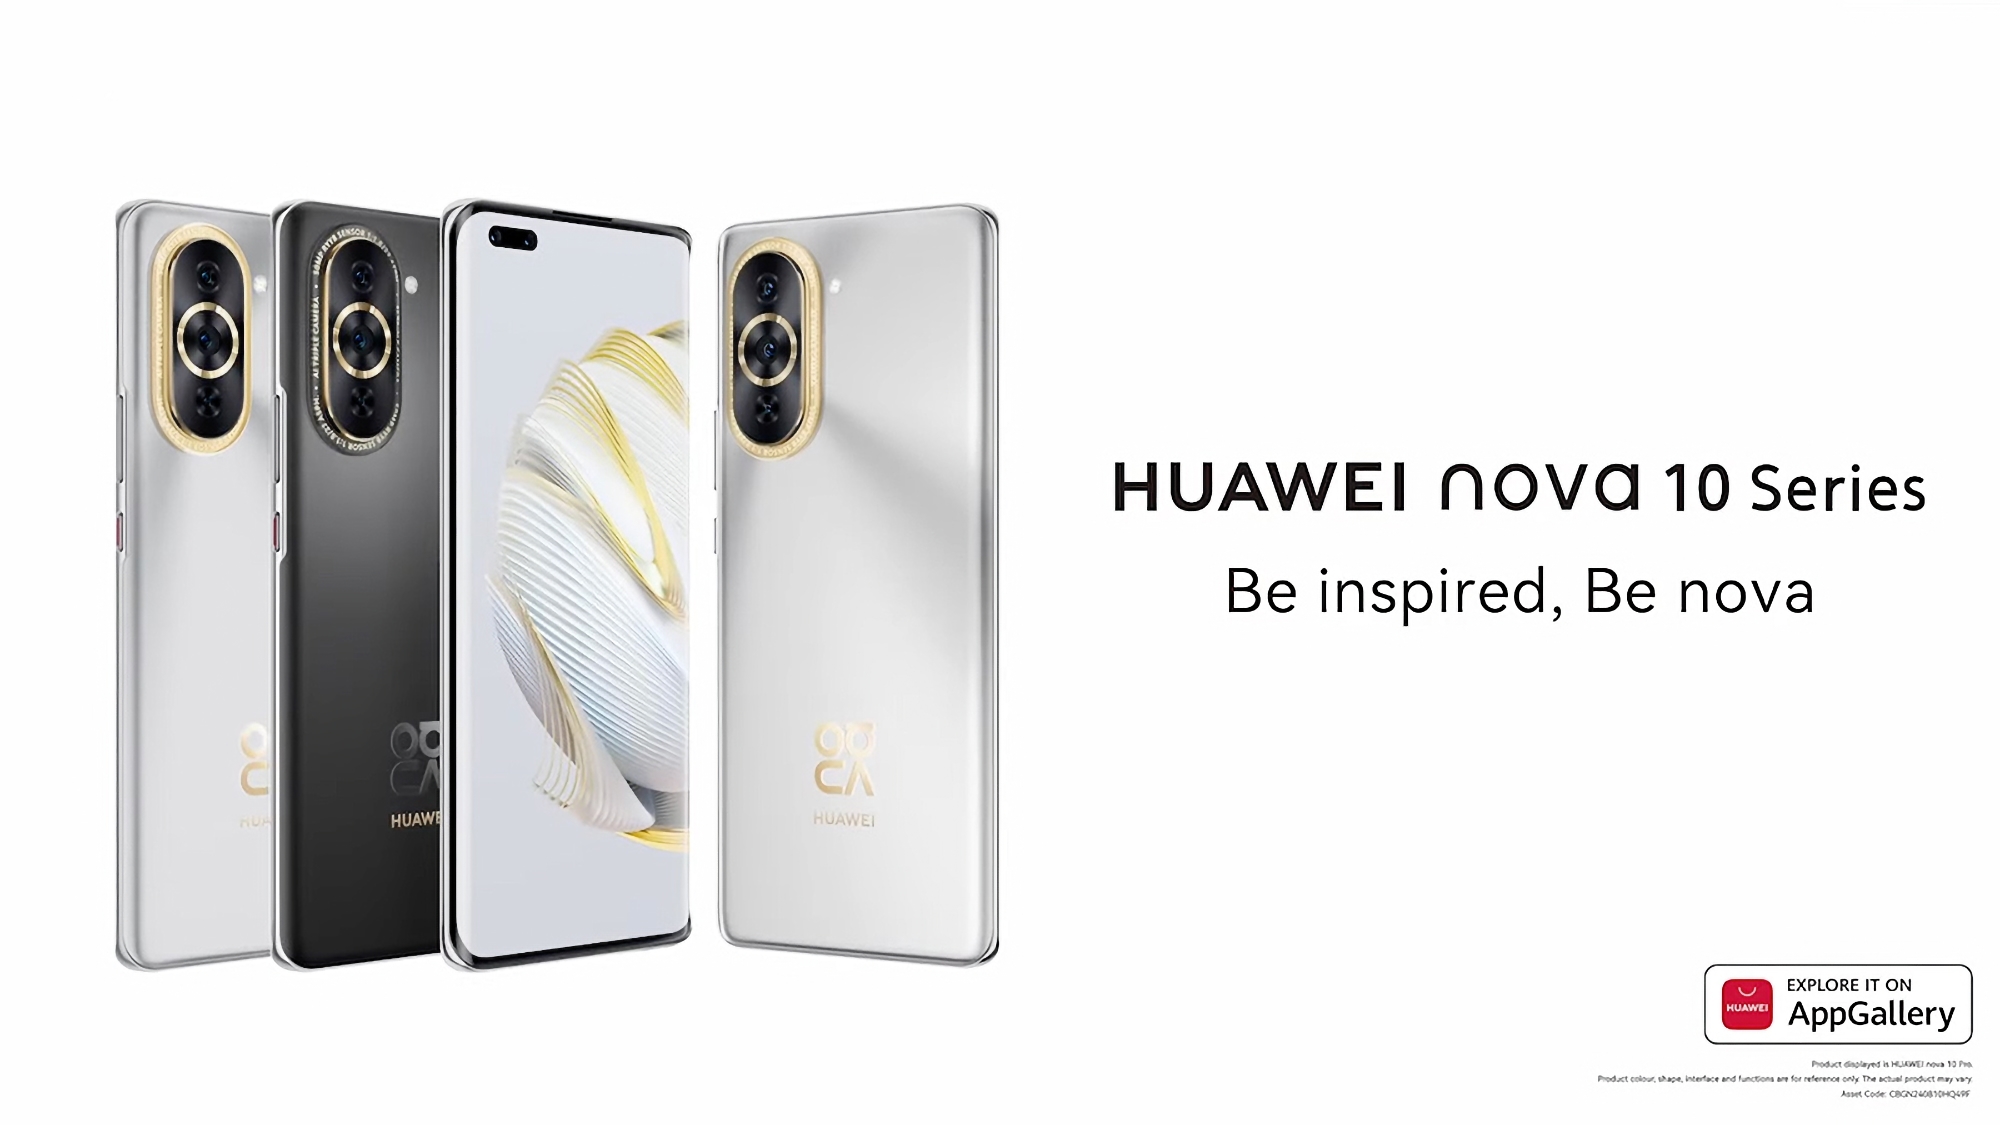 Huawei Nova 10 series of smartphones received a July security update